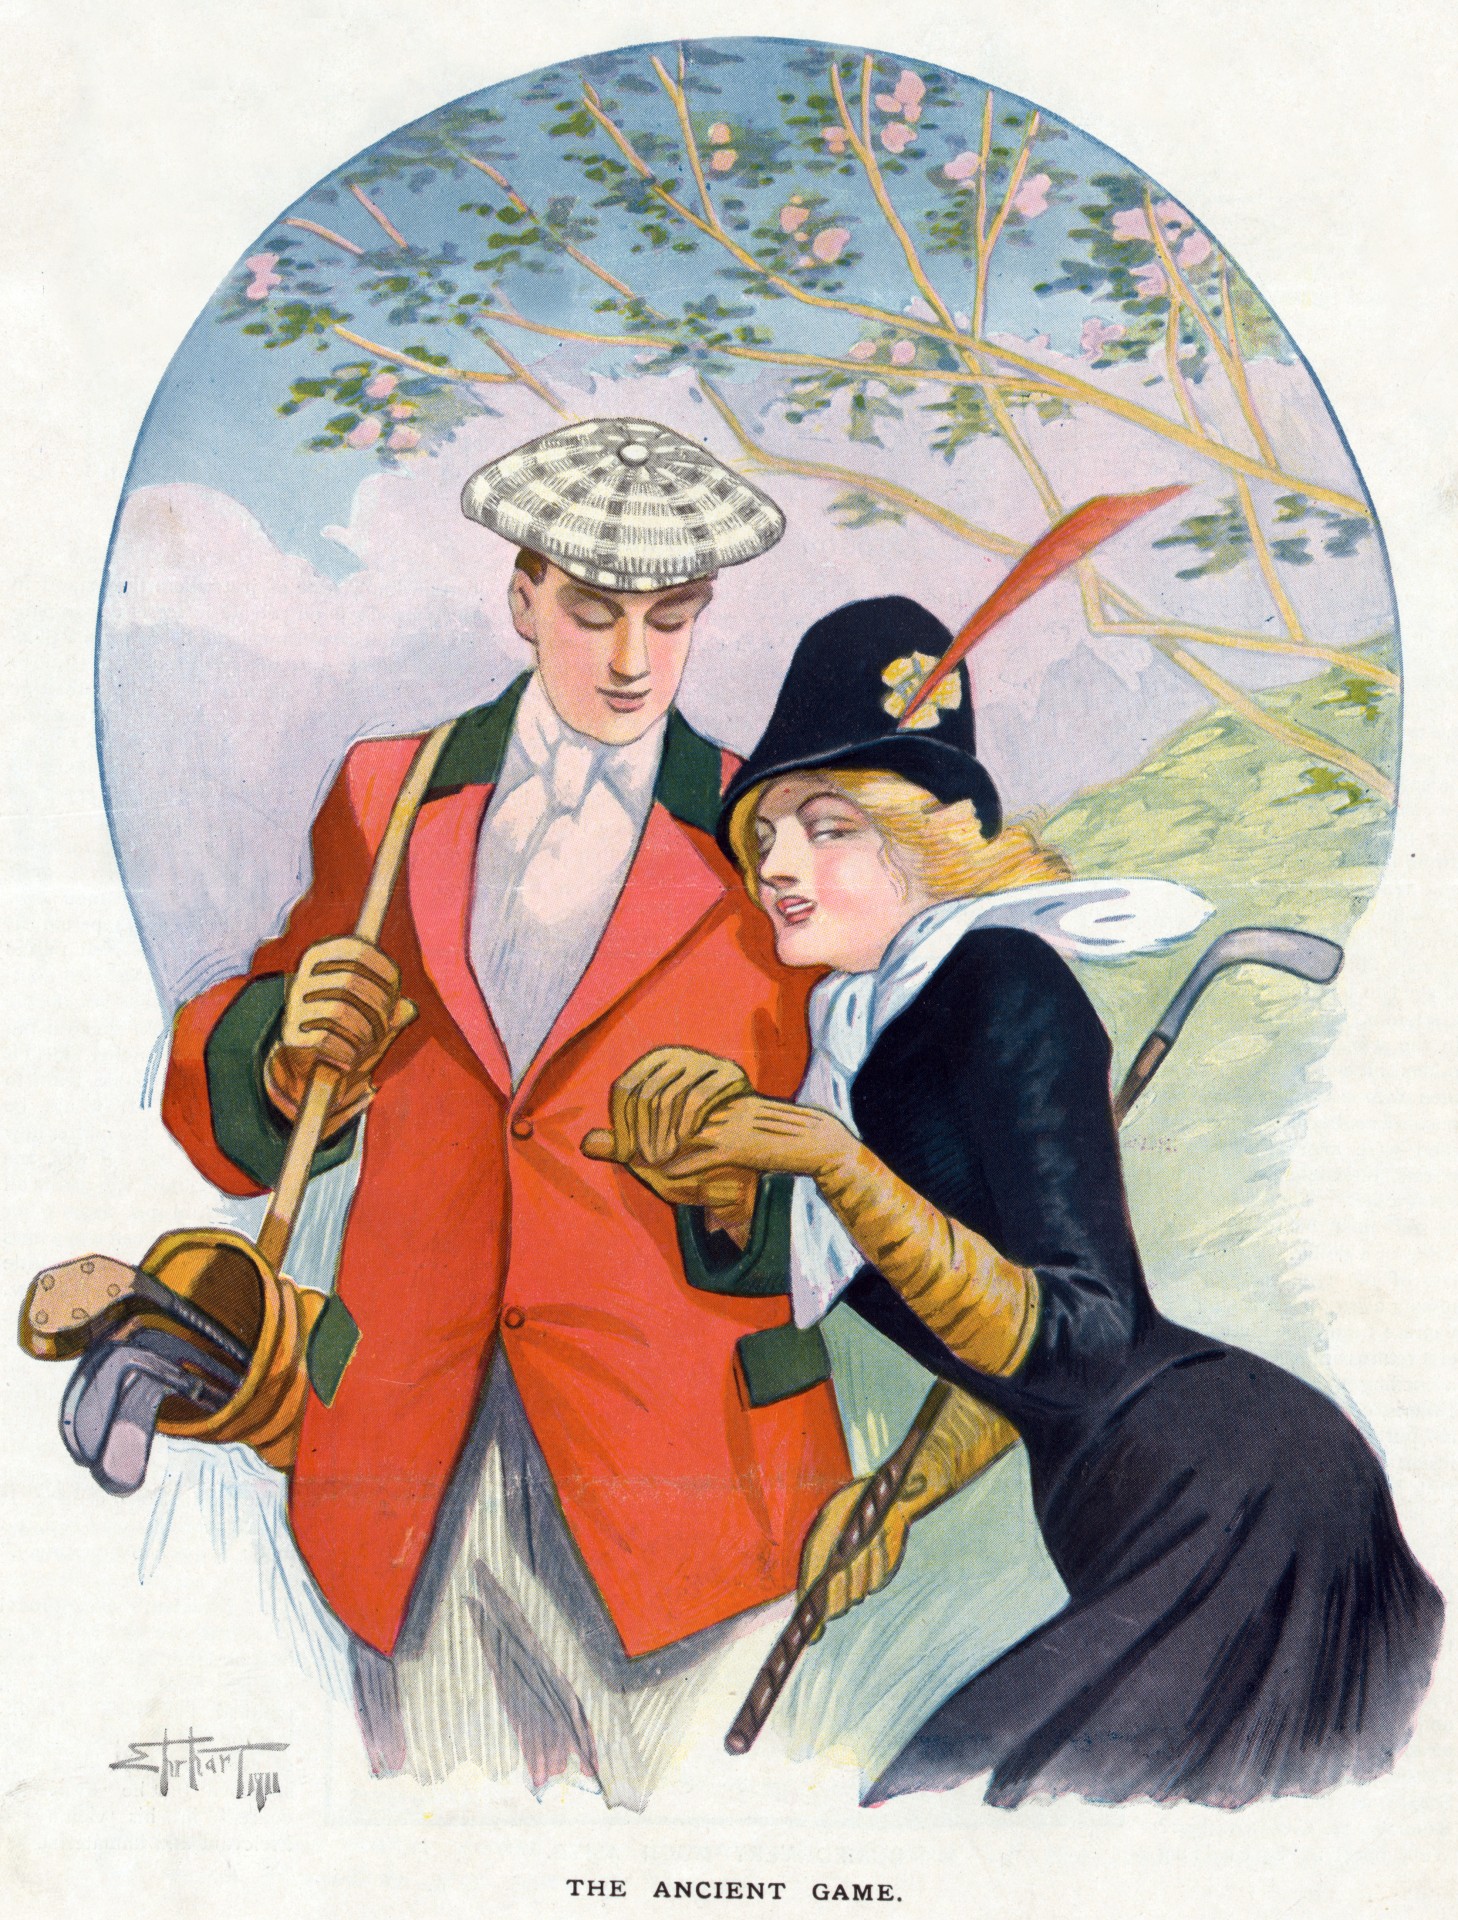 Public domain vintage poster of a romantic couple playing golf